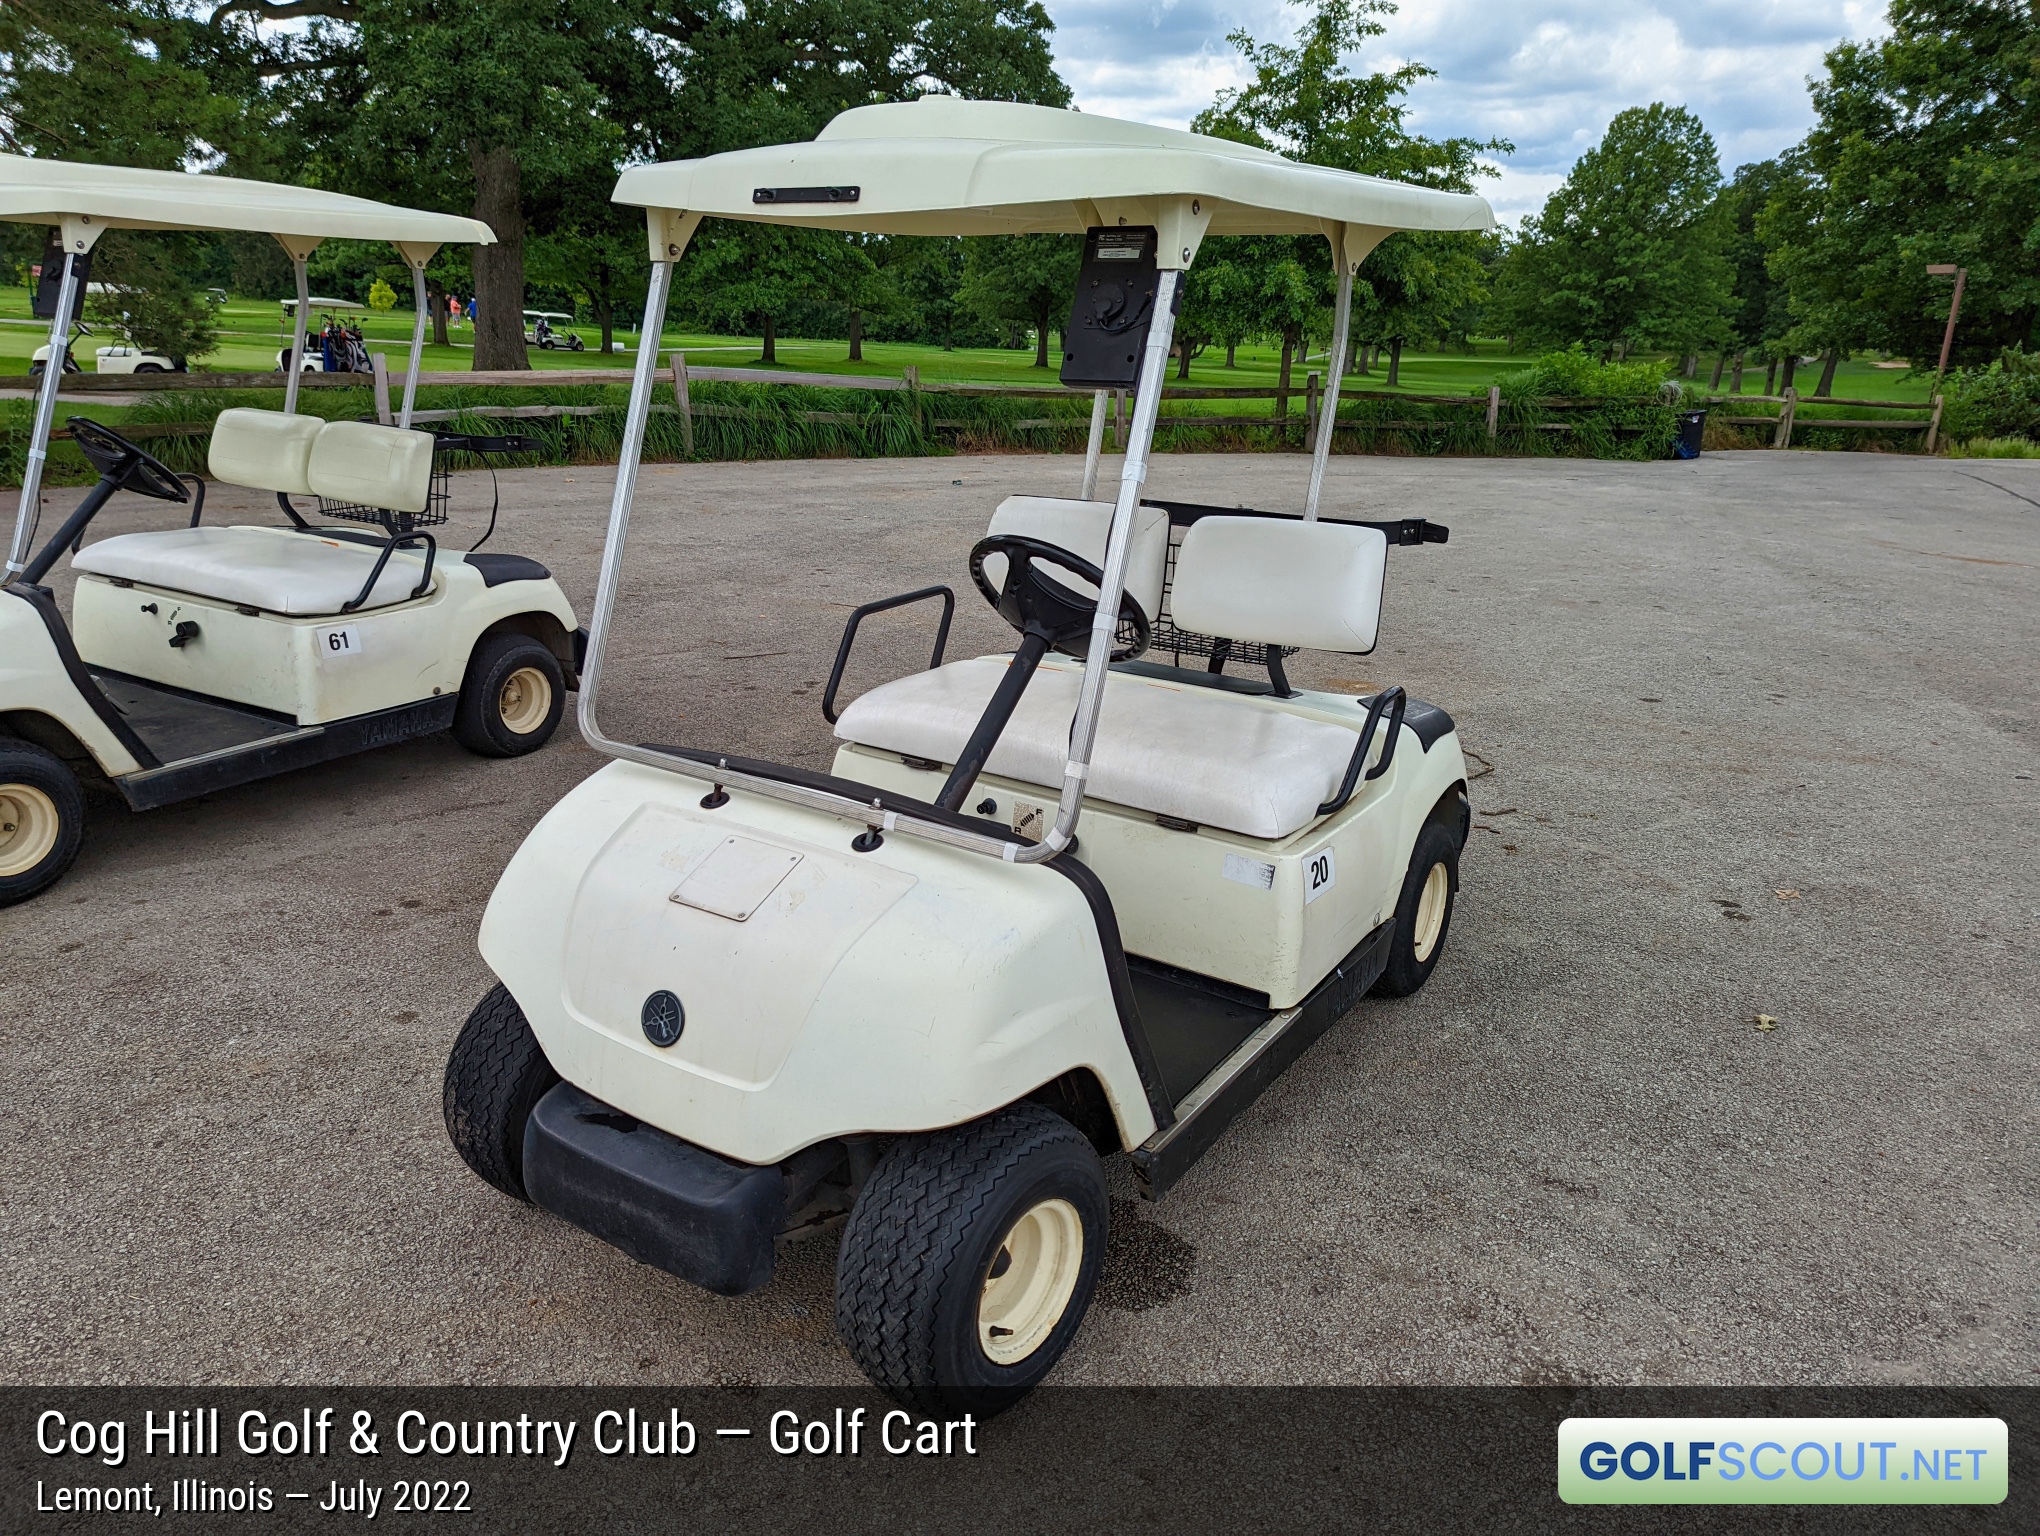 Photo of the golf carts at Cog Hill Course #1 in Lemont, Illinois. A golf cart at Cog Hill, from the front. It looks a little dated.